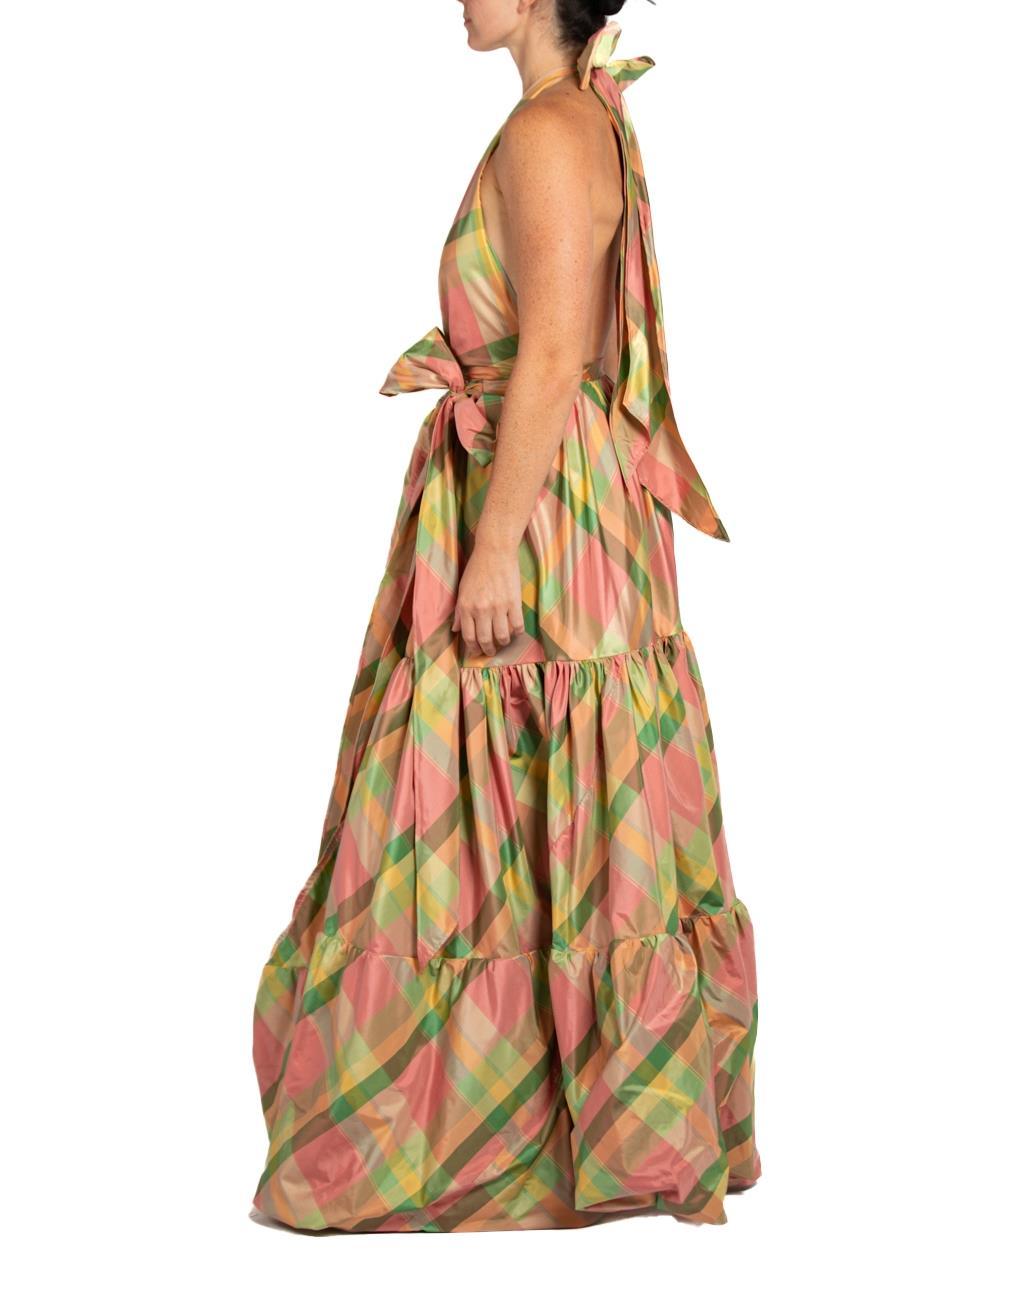 This dress fits multiple sizes from a 2 to a 12 with an adjustable waste MORPHEW COLLECTION Pink & Green Silk Taffeta Plaid Gown 
MORPHEW COLLECTION is made entirely by hand in our NYC Ateliér of rare antique materials sourced from around the globe.